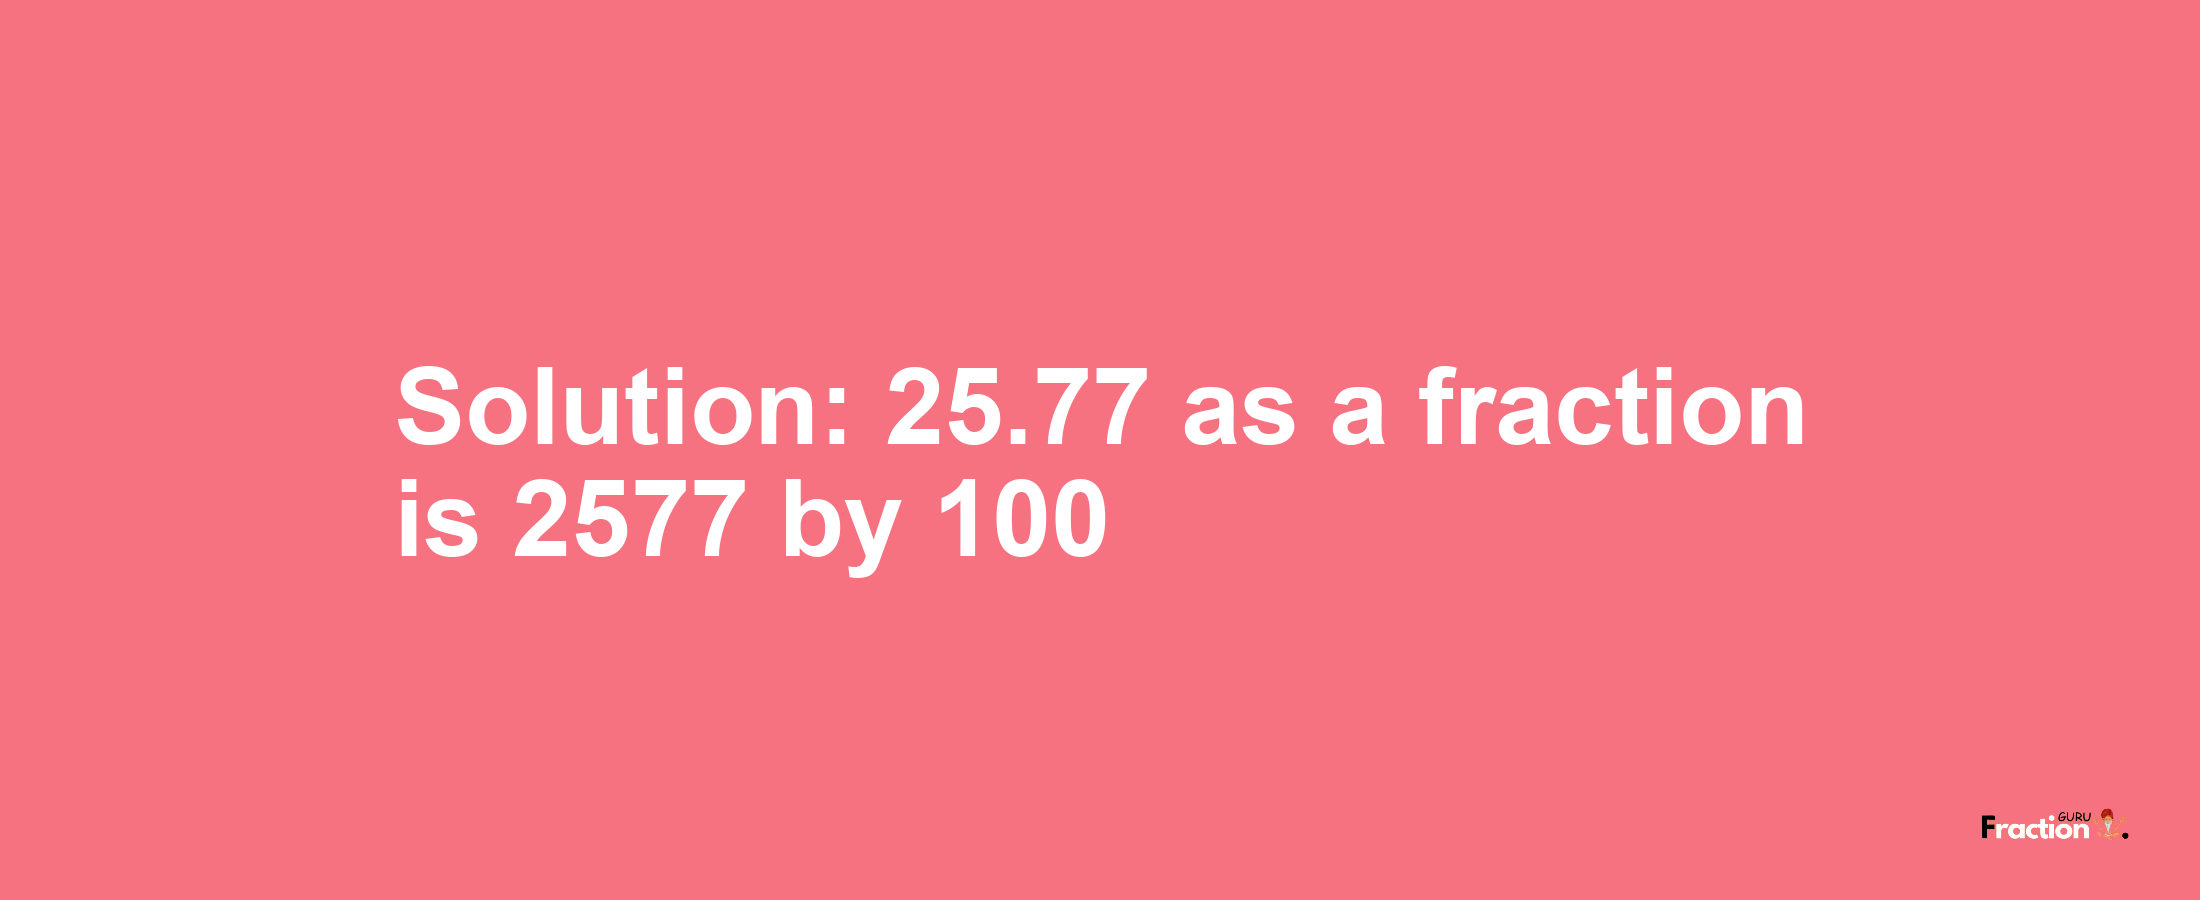 Solution:25.77 as a fraction is 2577/100